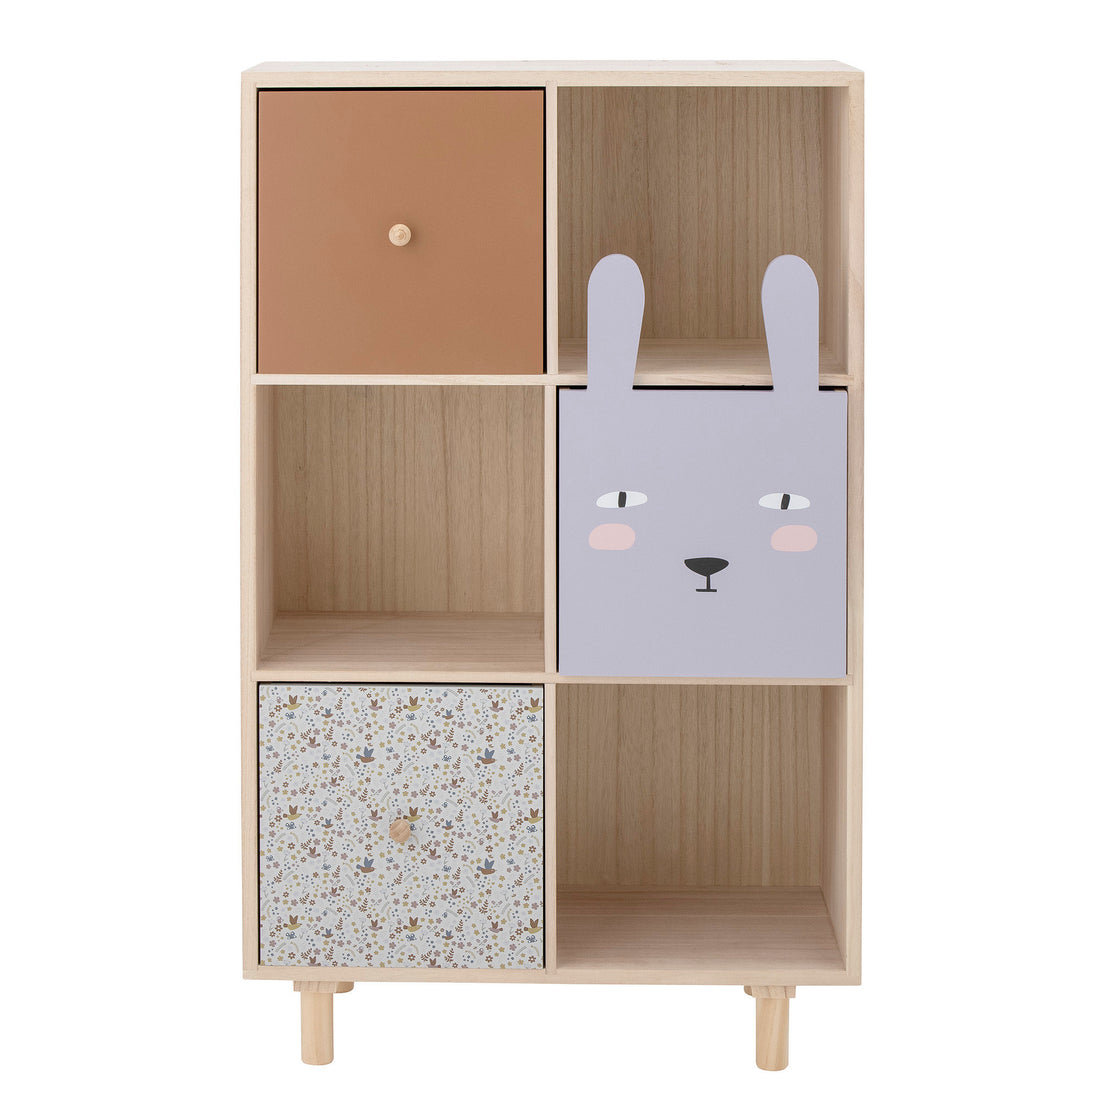 Bloomingville MINI Calle Bookcase w/Drawers, Natural, Madeira de Cerejeira